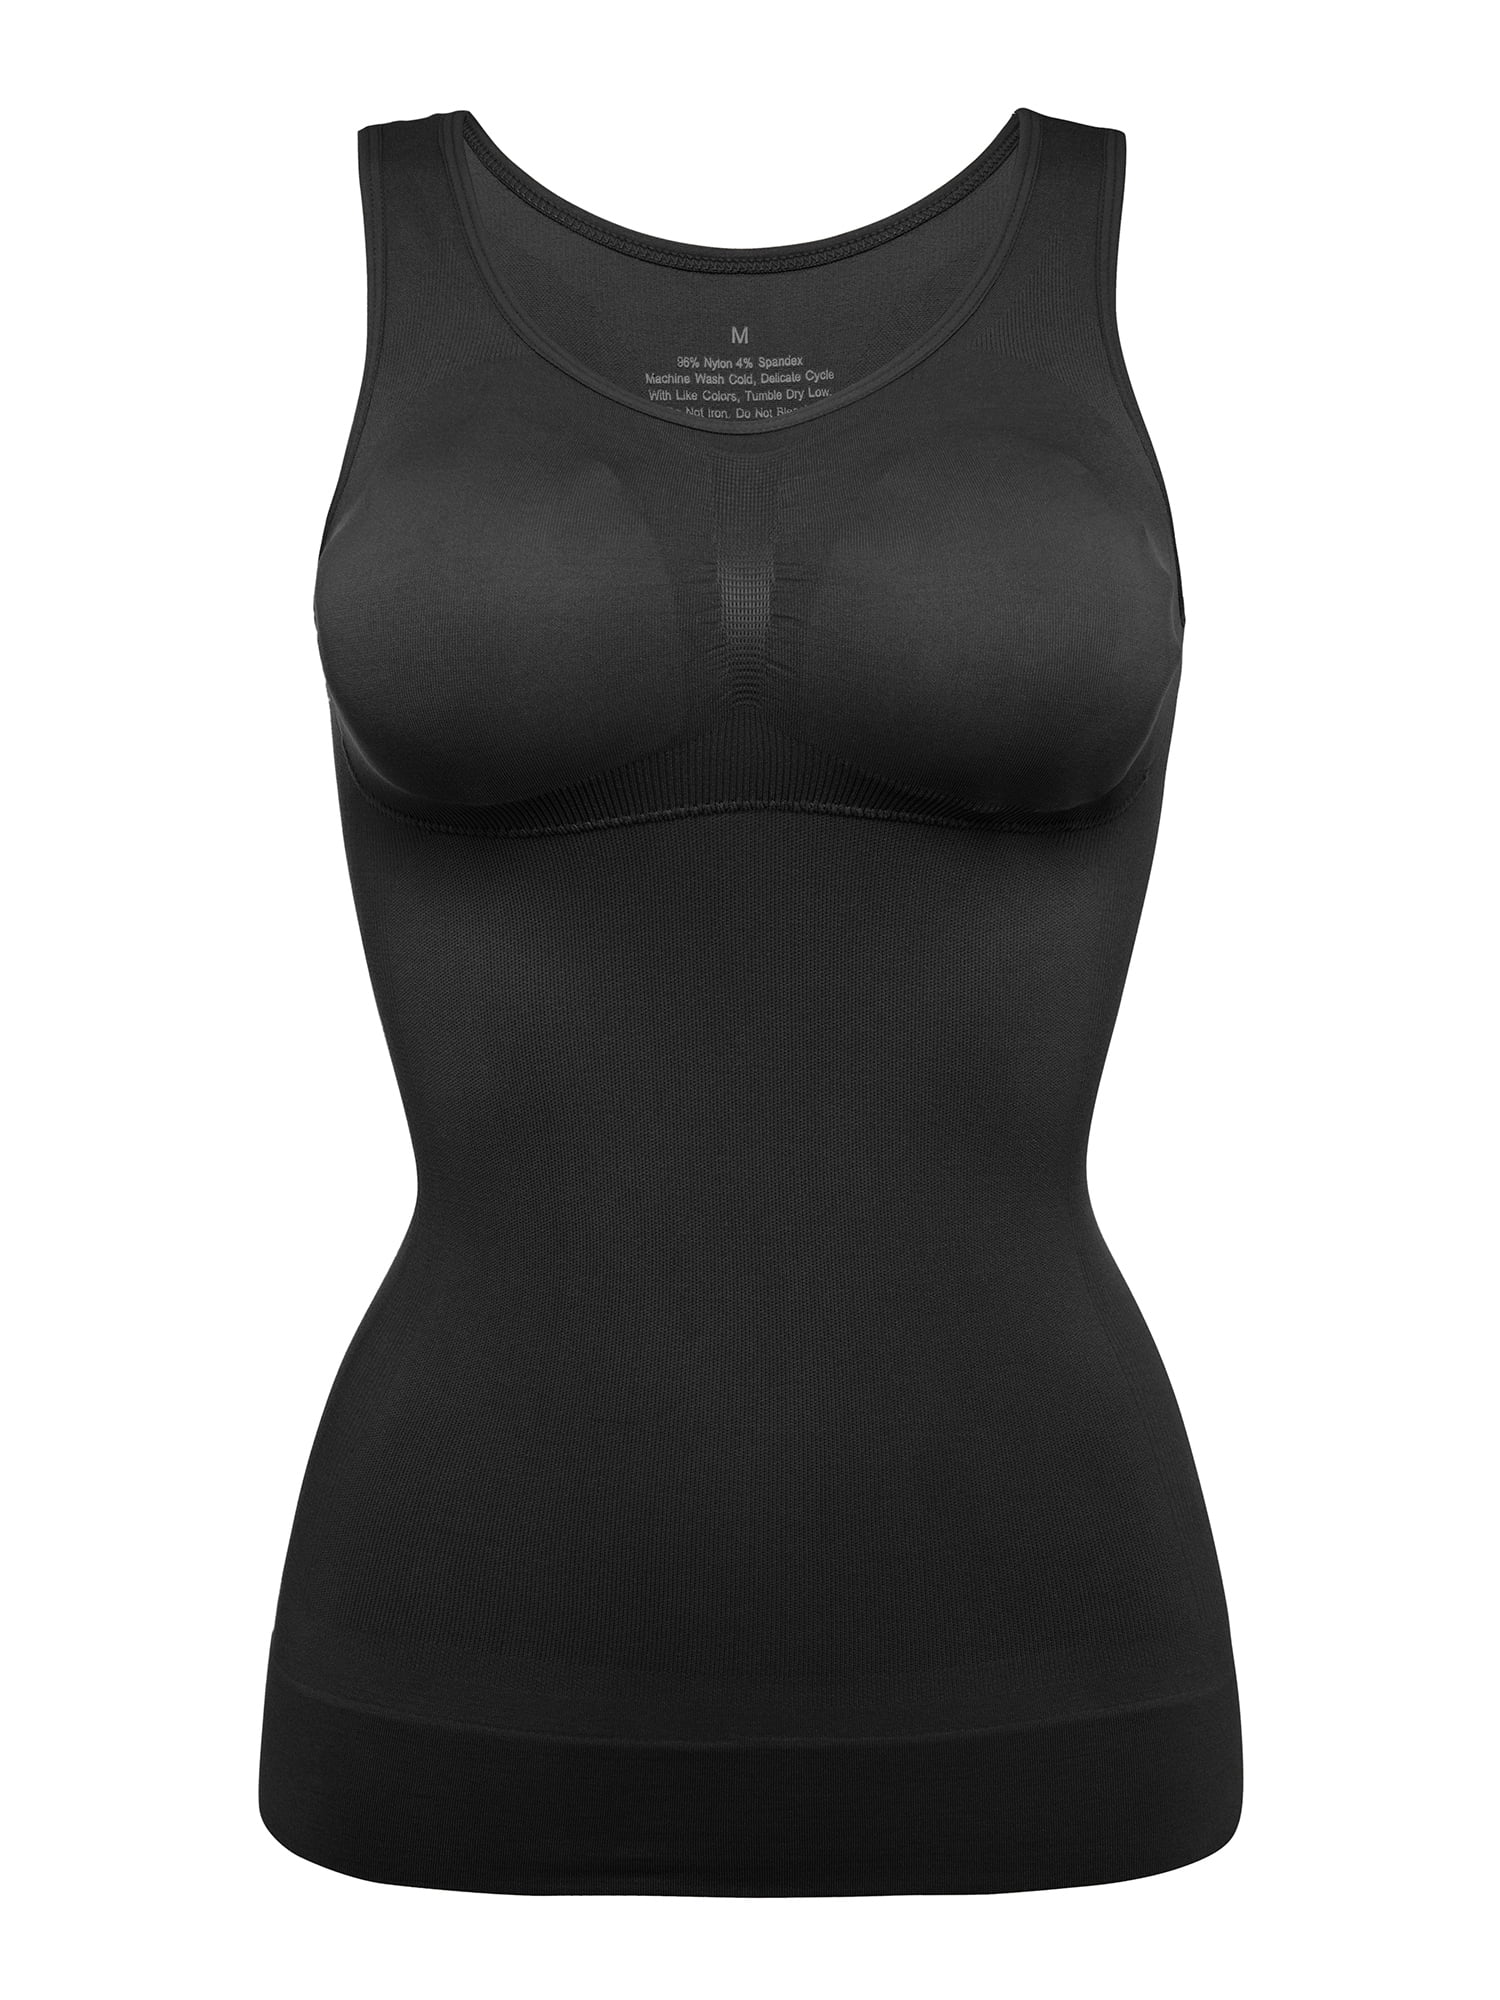 Buy BVIMEPOS Shapewear for Women Tummy Control Shaping Camisole Compression Tank  Tops Seamless Body Shaper Waist Trainer Vest, Black, Medium at